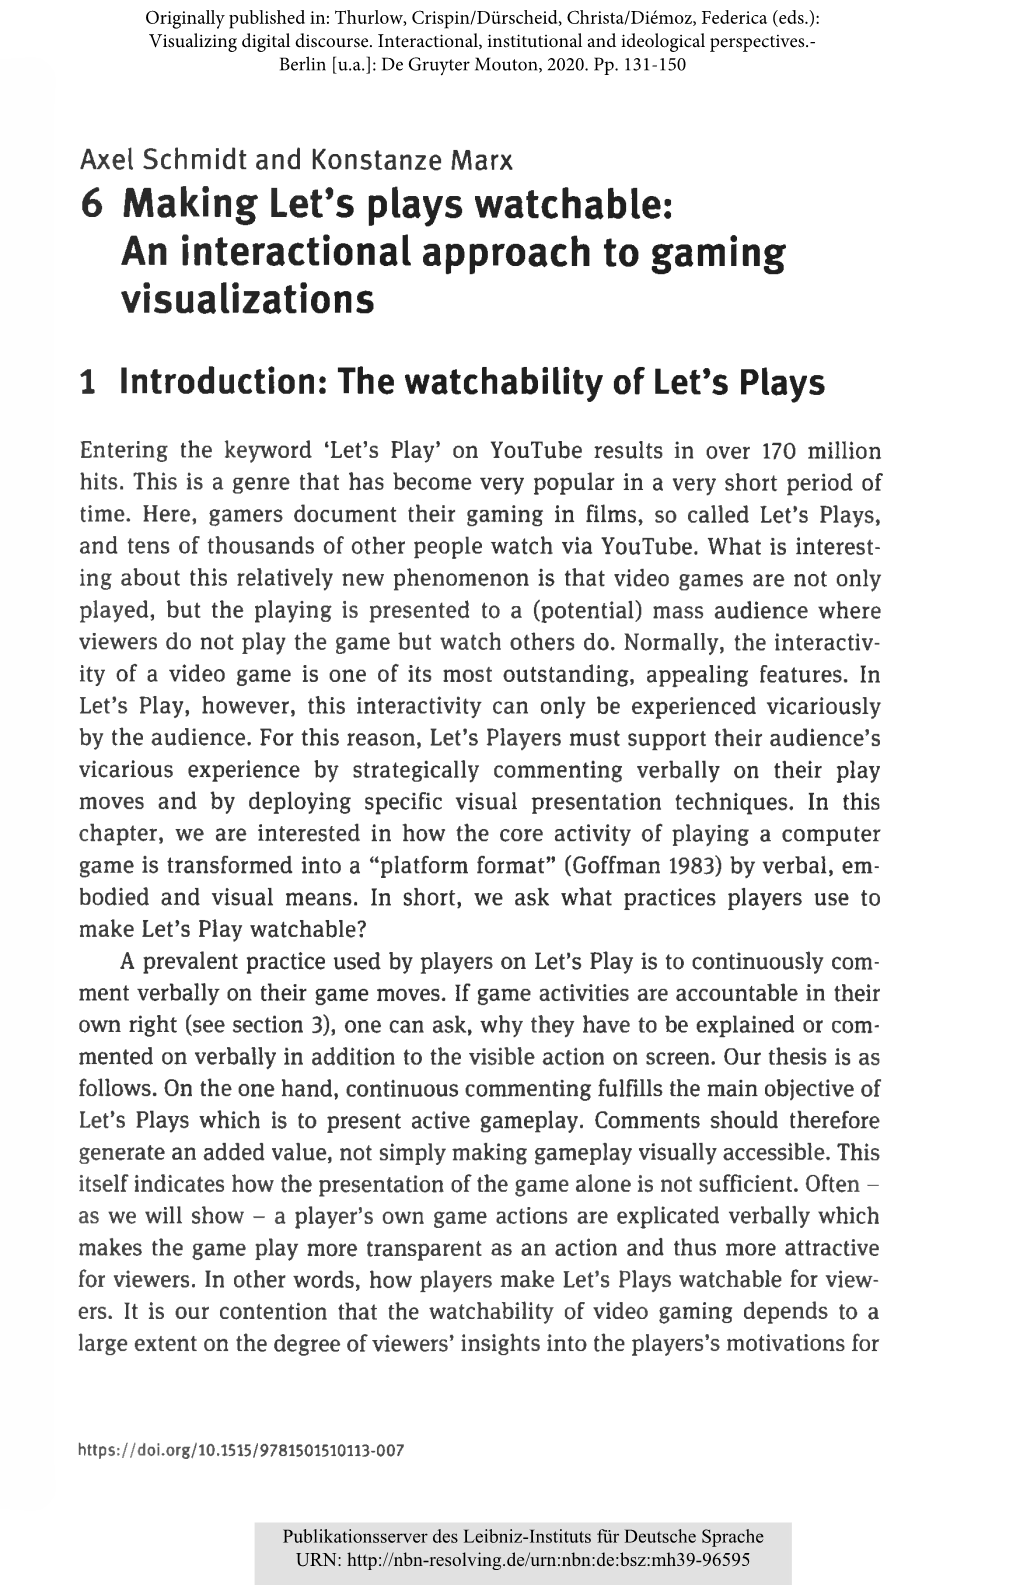 6 Making Let's Plays Watchable: an Interactional Approach to Gaming